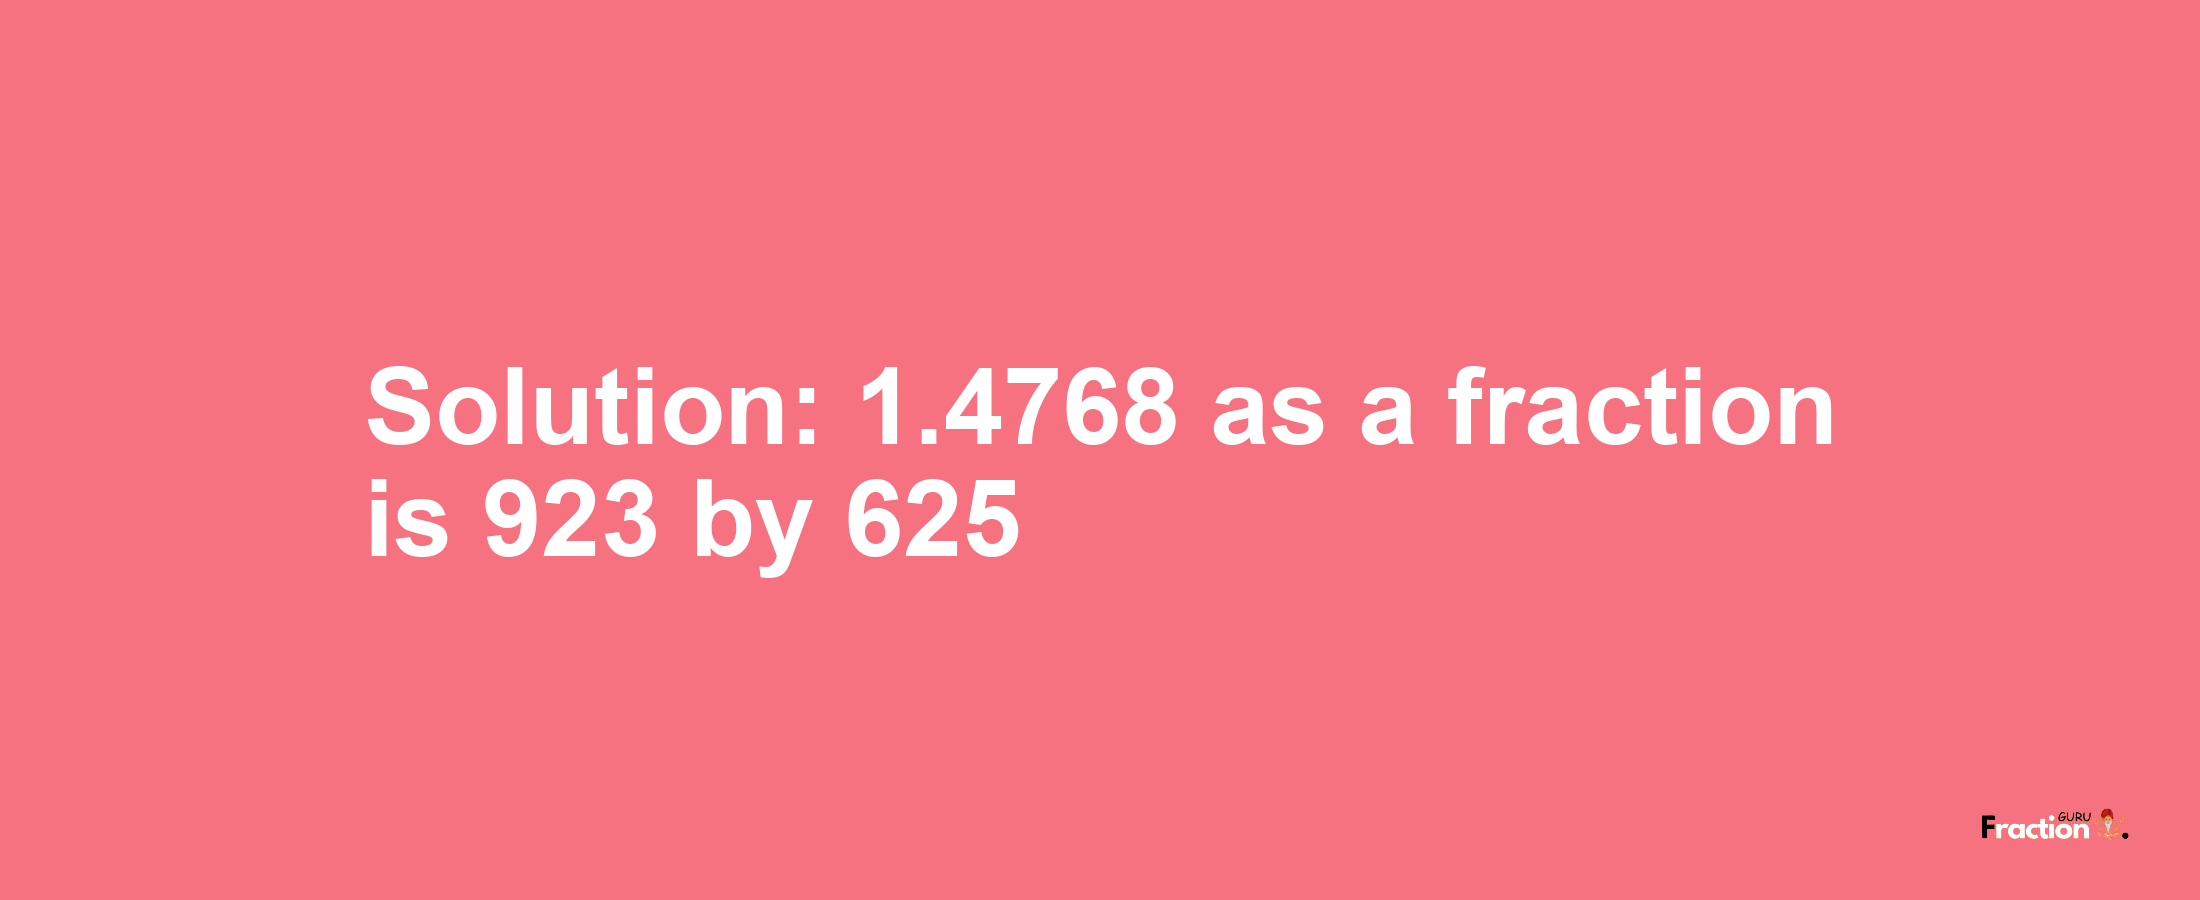 Solution:1.4768 as a fraction is 923/625